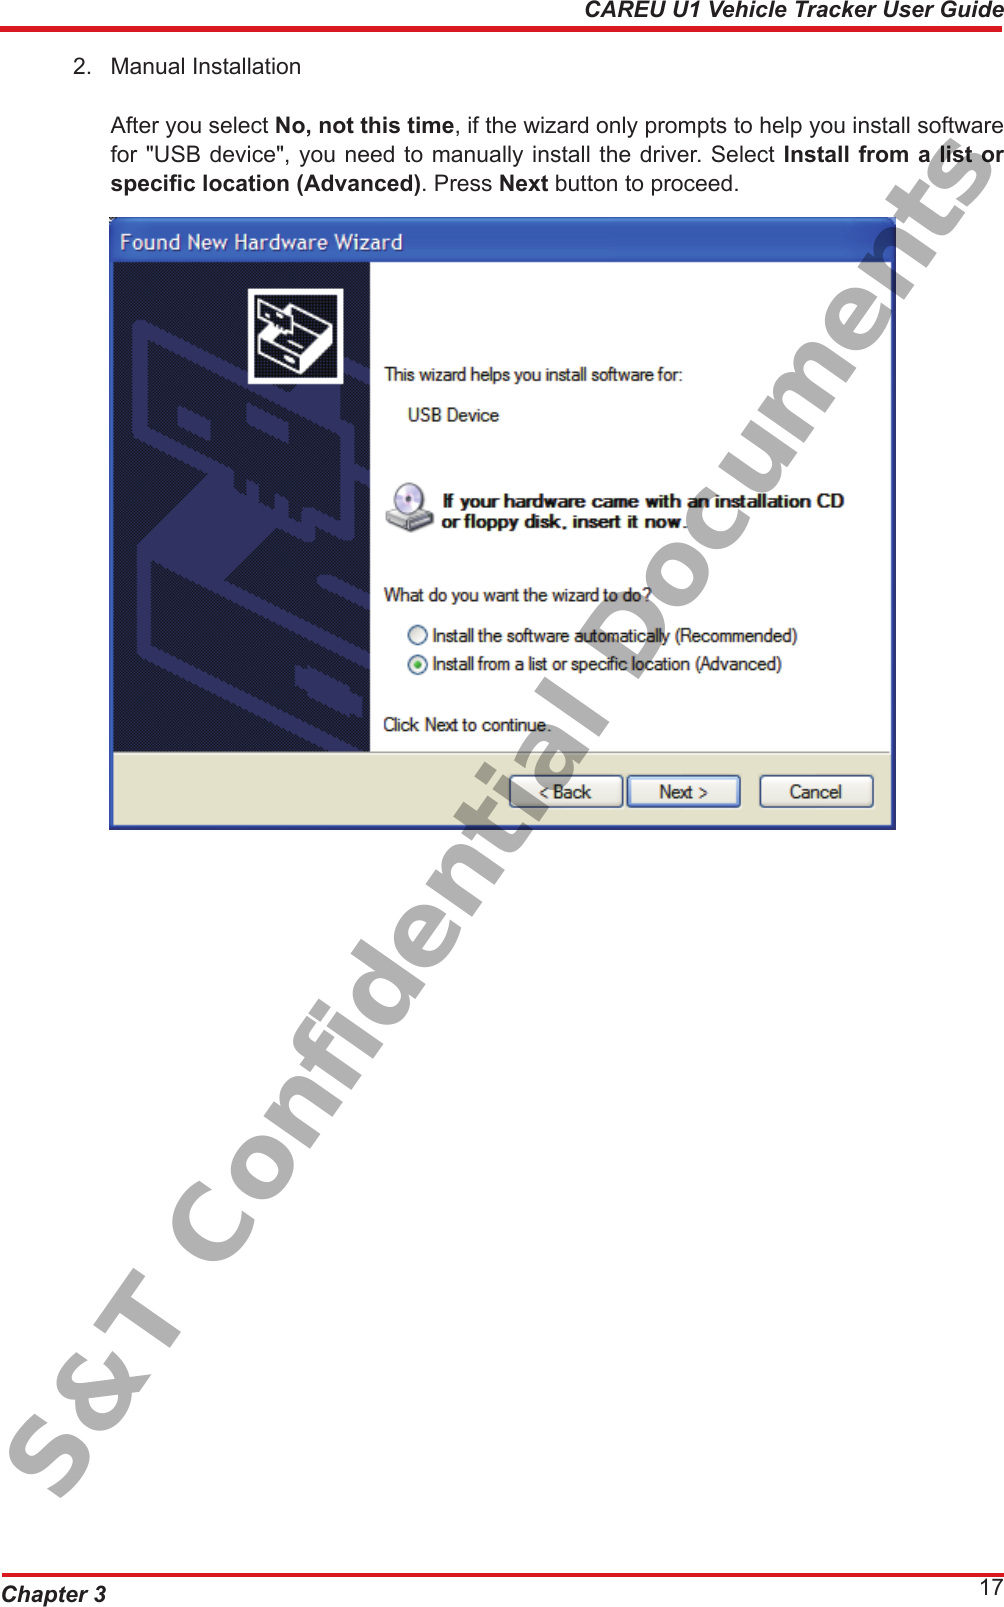 Chapter 3 17CAREU U1 Vehicle Tracker User Guide2.  Manual Installation After you select No, not this time, if the wizard only prompts to help you install software for &quot;USB device&quot;, you need to manually install the driver. Select Install from a list or specic location (Advanced). Press Next button to proceed.S&amp;T Confidential Documents